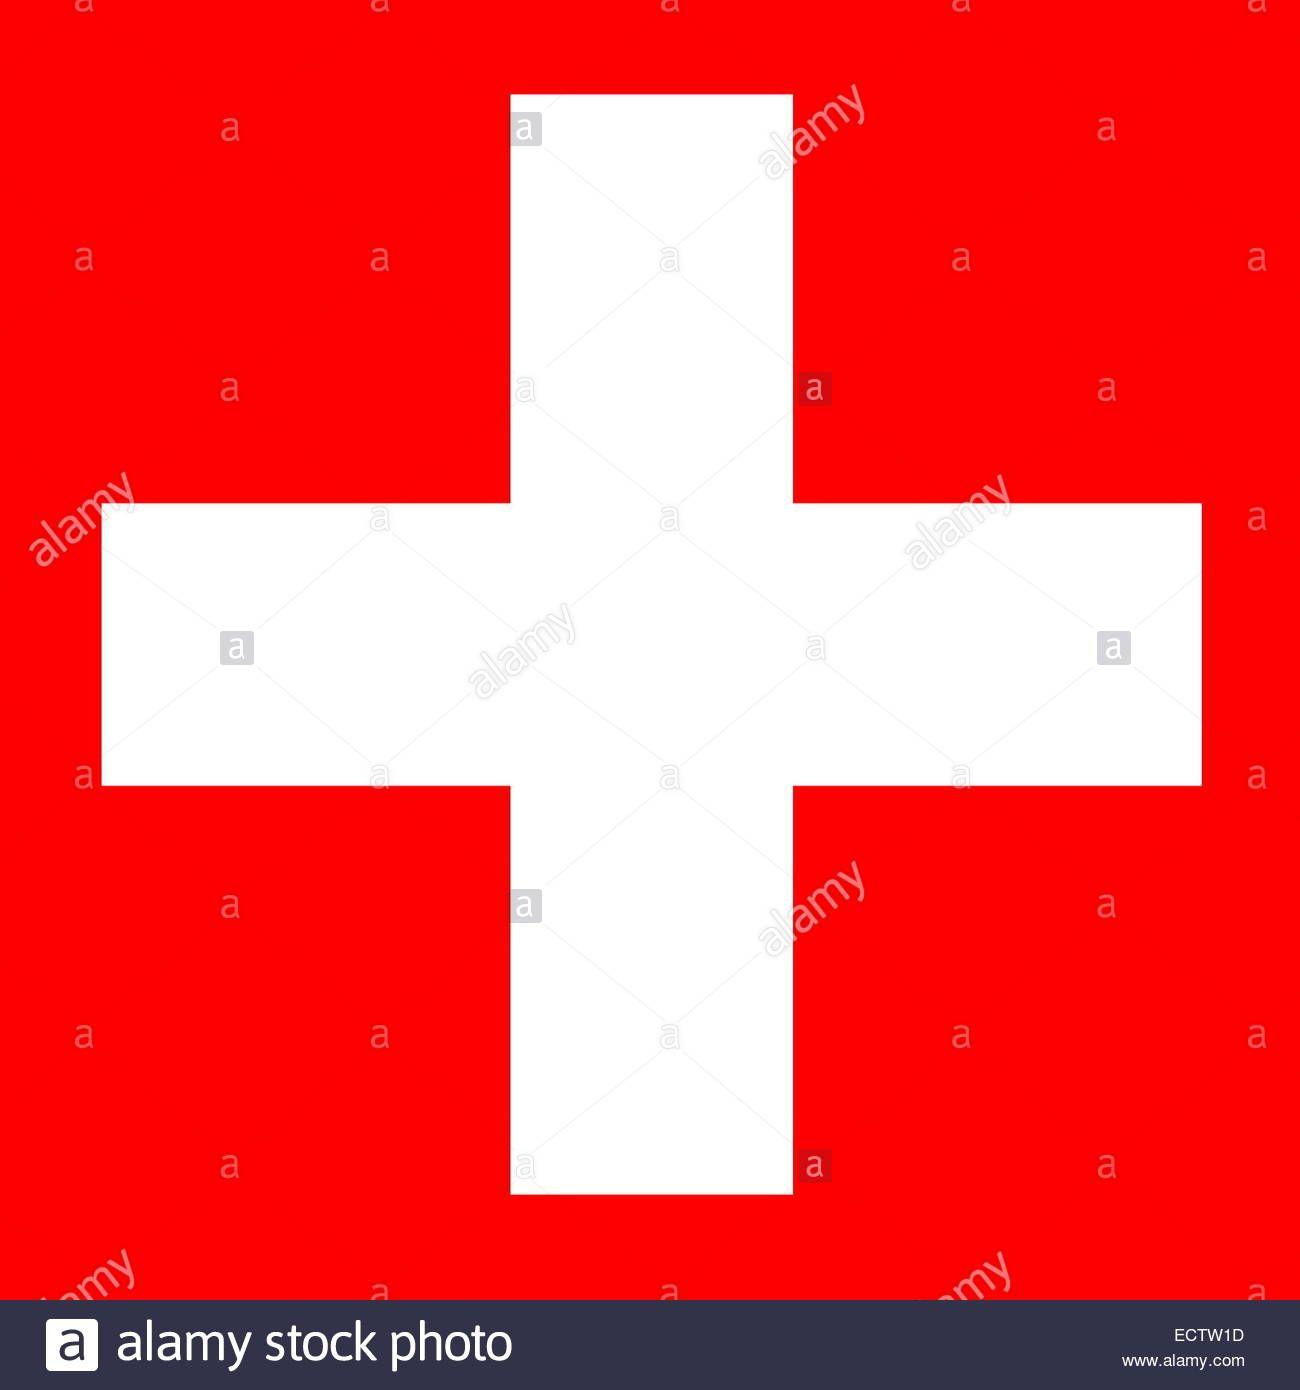 Red Square Company Logo - Red square white cross Logos